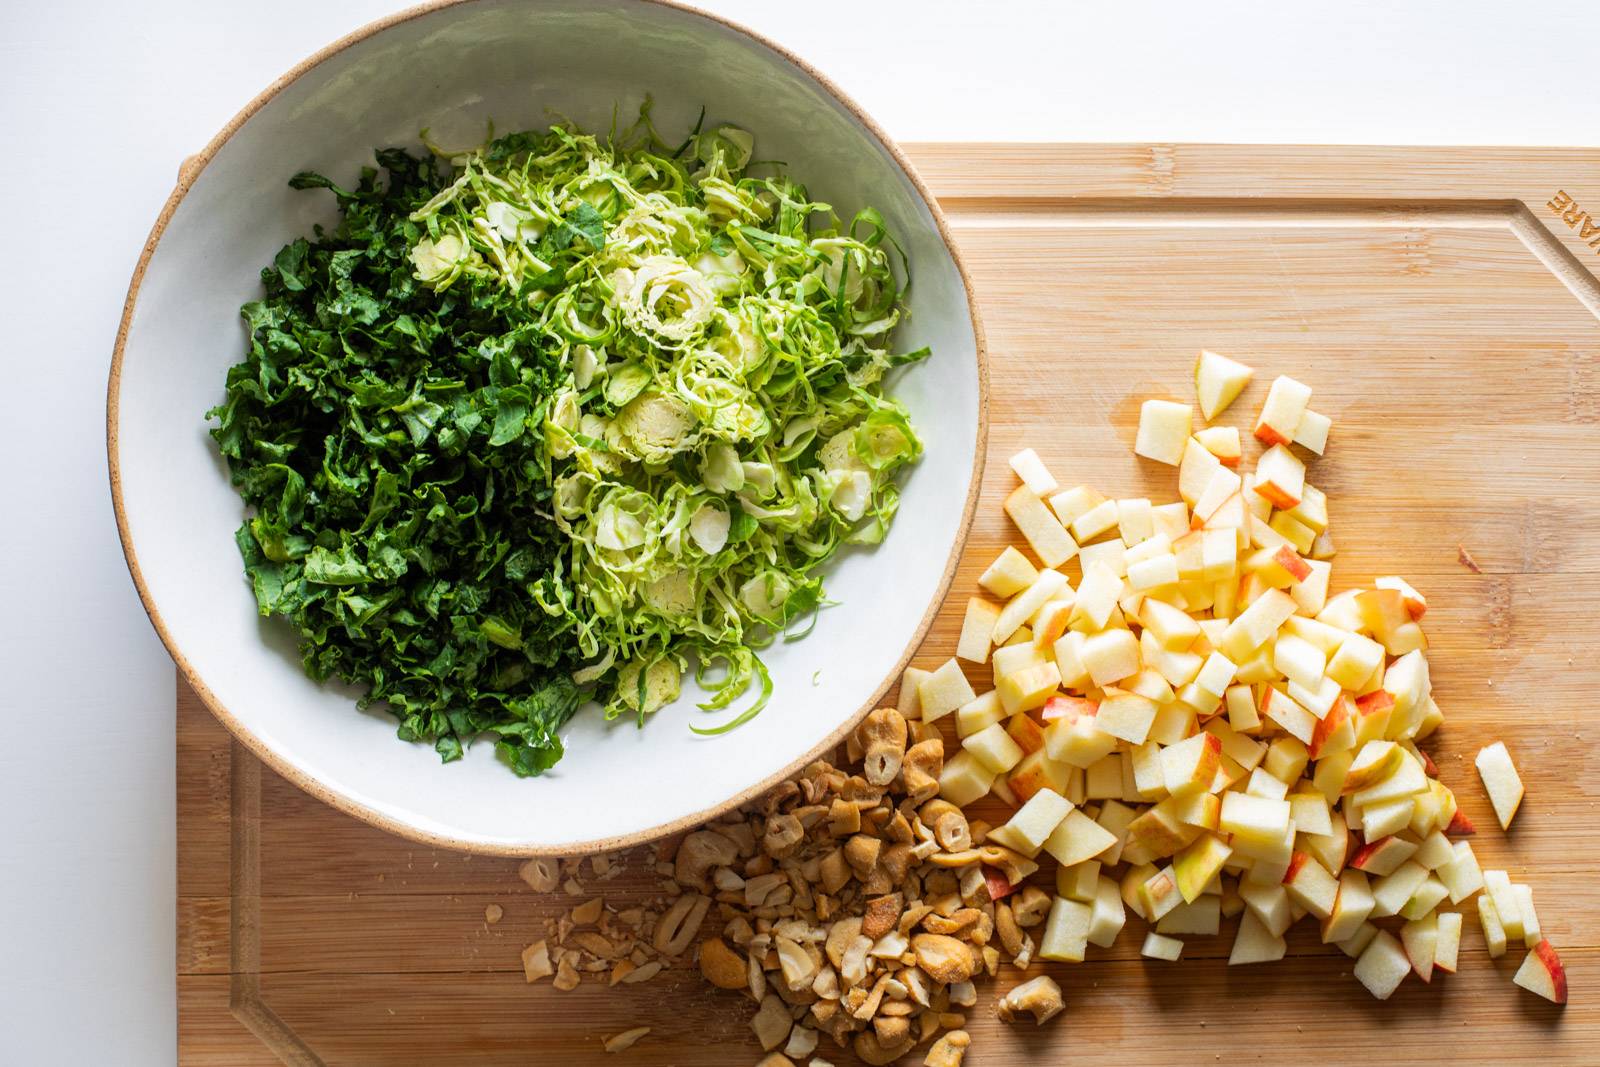 Kale and Brussels Sprouts shredded in a bowl, with apples and cashews chopped on a cutting board.